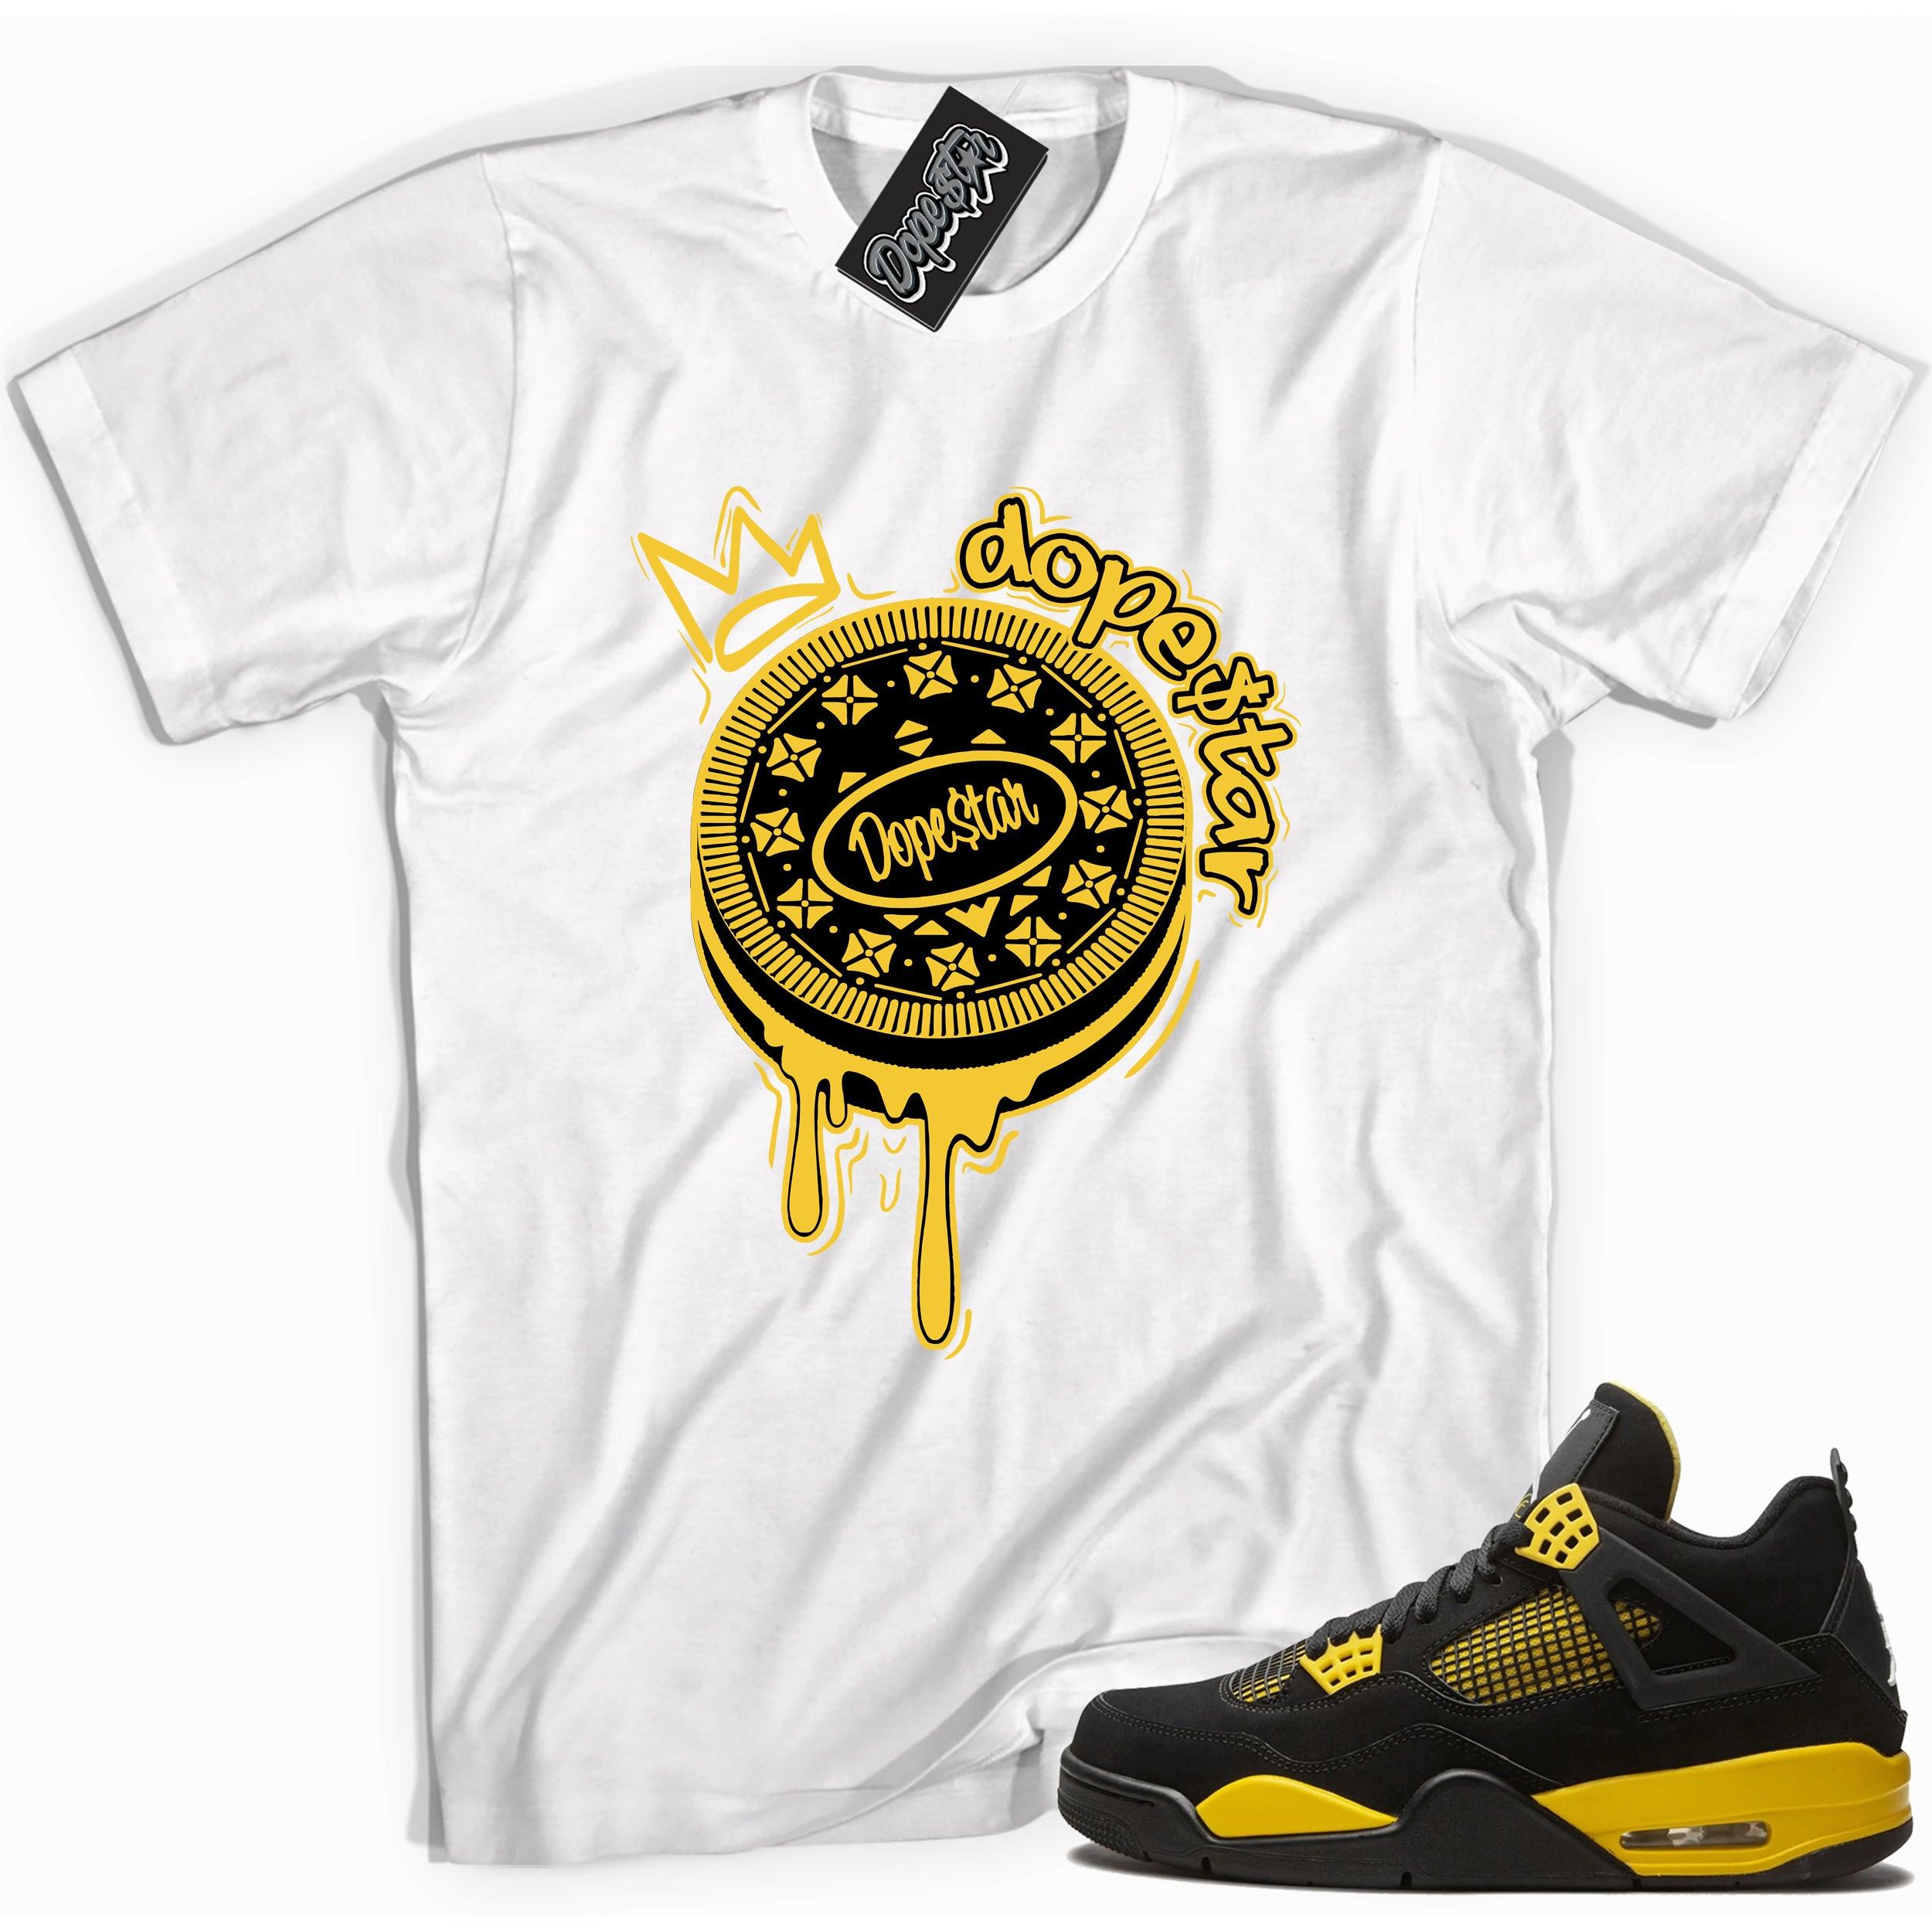 Cool white  graphic tee with 'dopestar oreo' print, that perfectly matches Air Jordan 4 Thunder sneakers